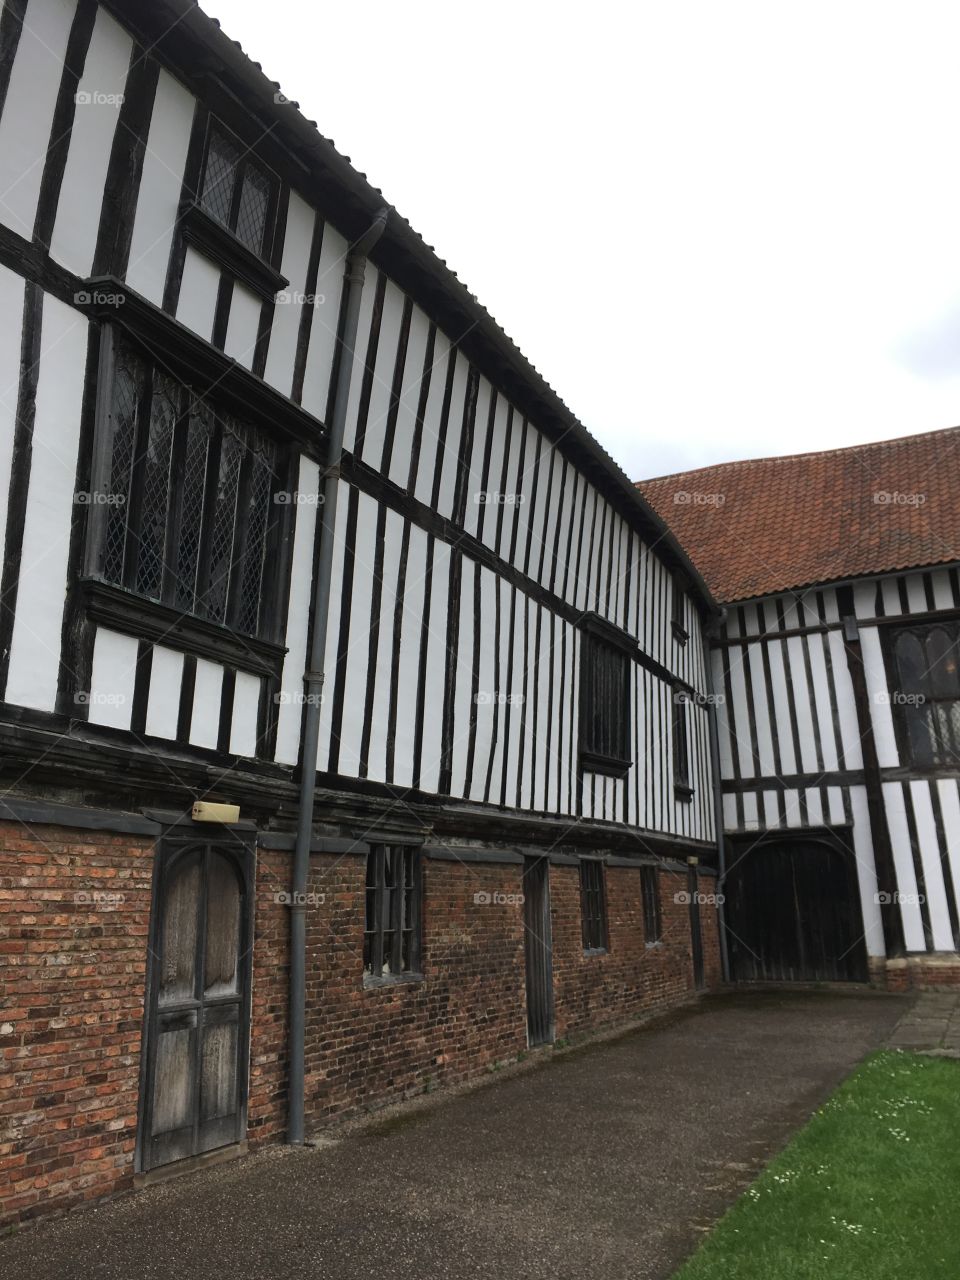 Exterior view of the timber framing and brickwork at the medieval Manor House at Gainsborough Old Hall